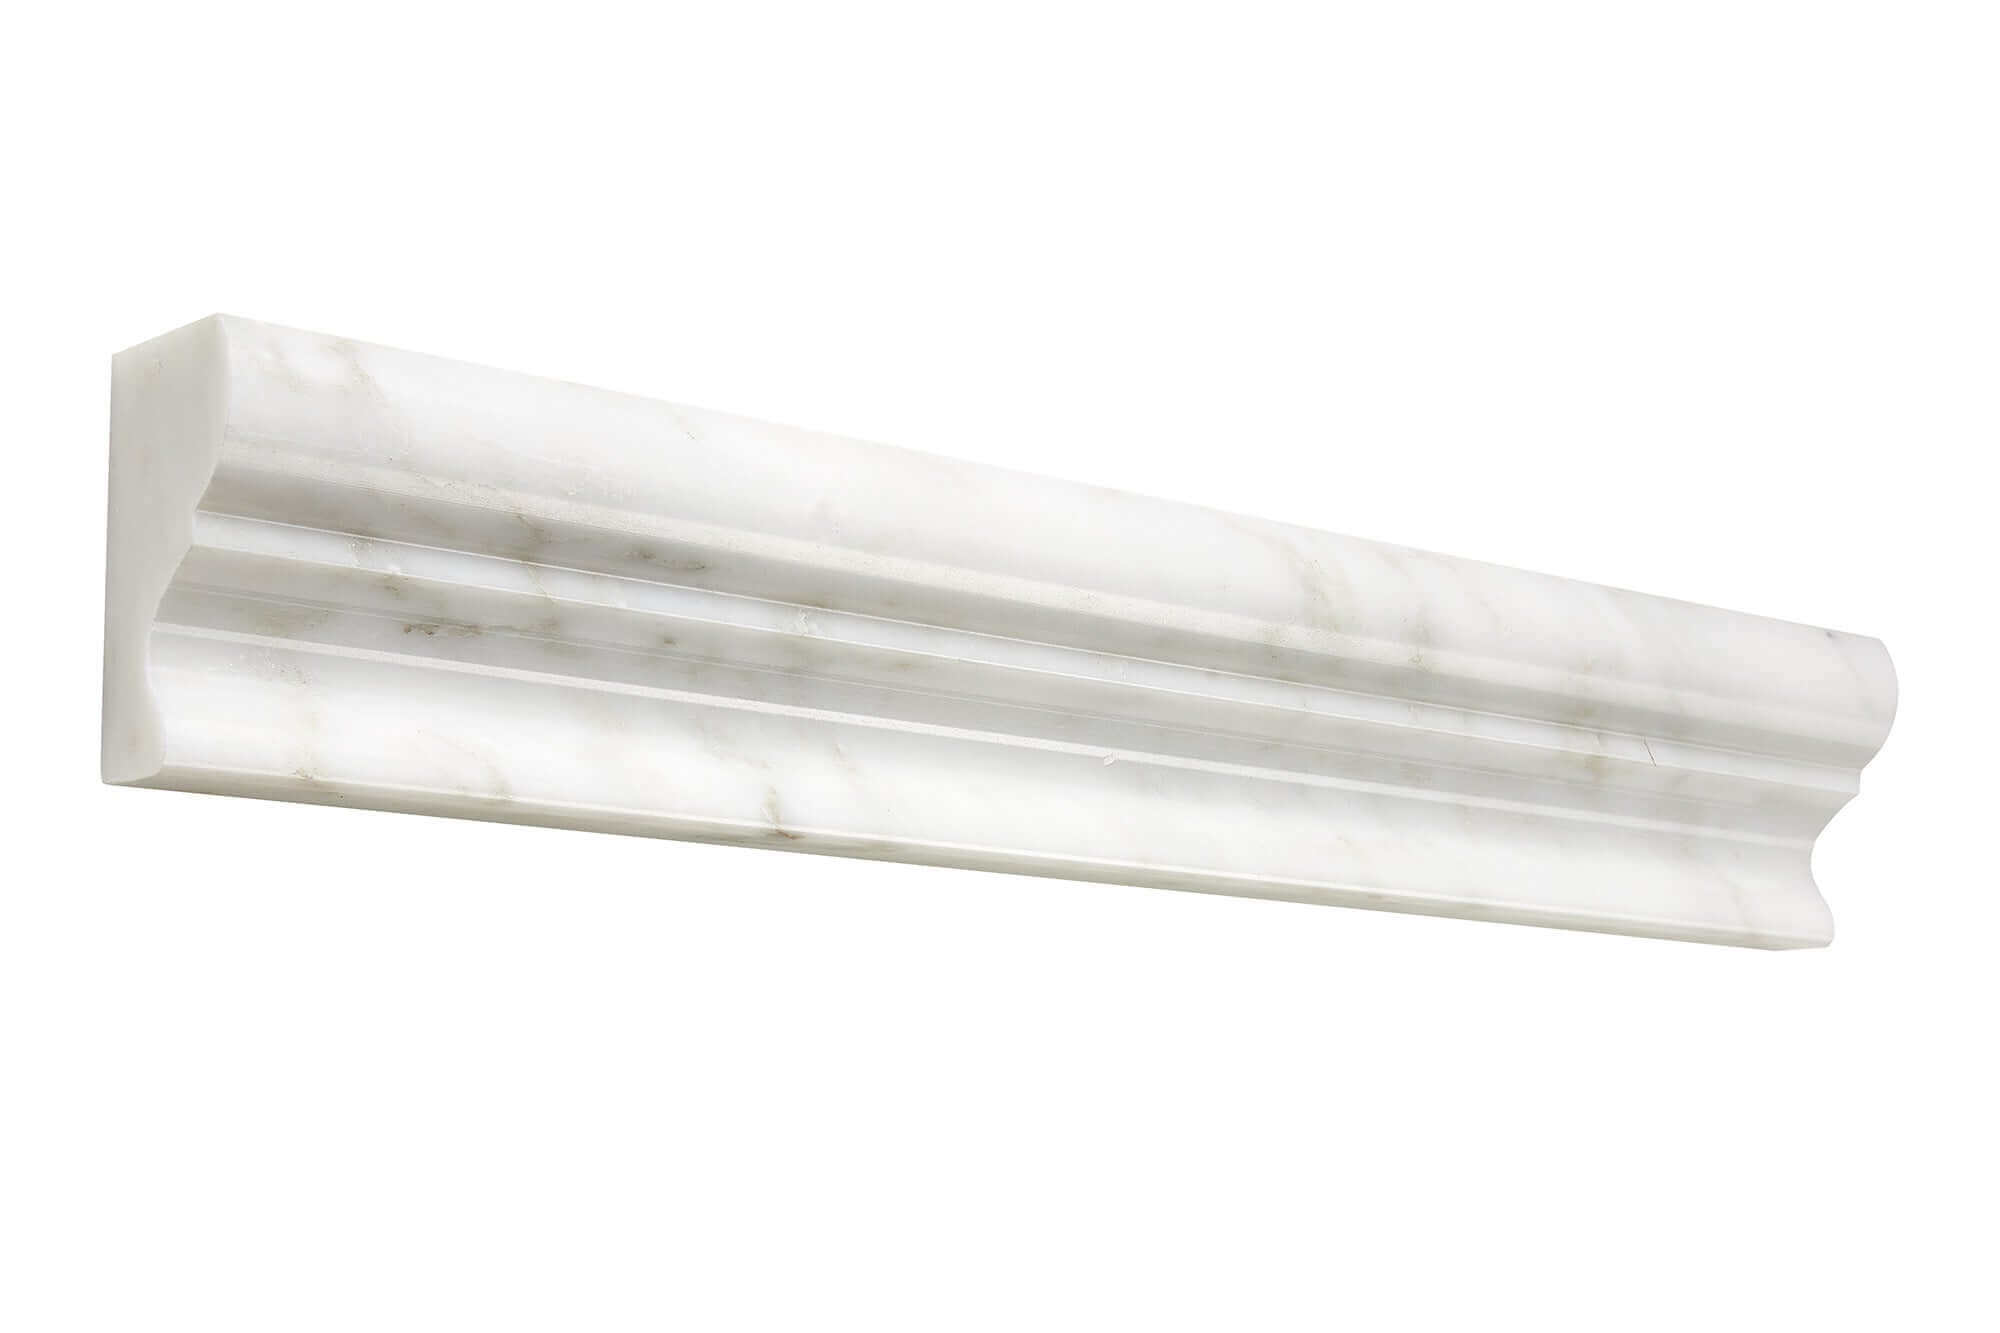 Oriental White Marble 2 x 12 Crown Molding Polished